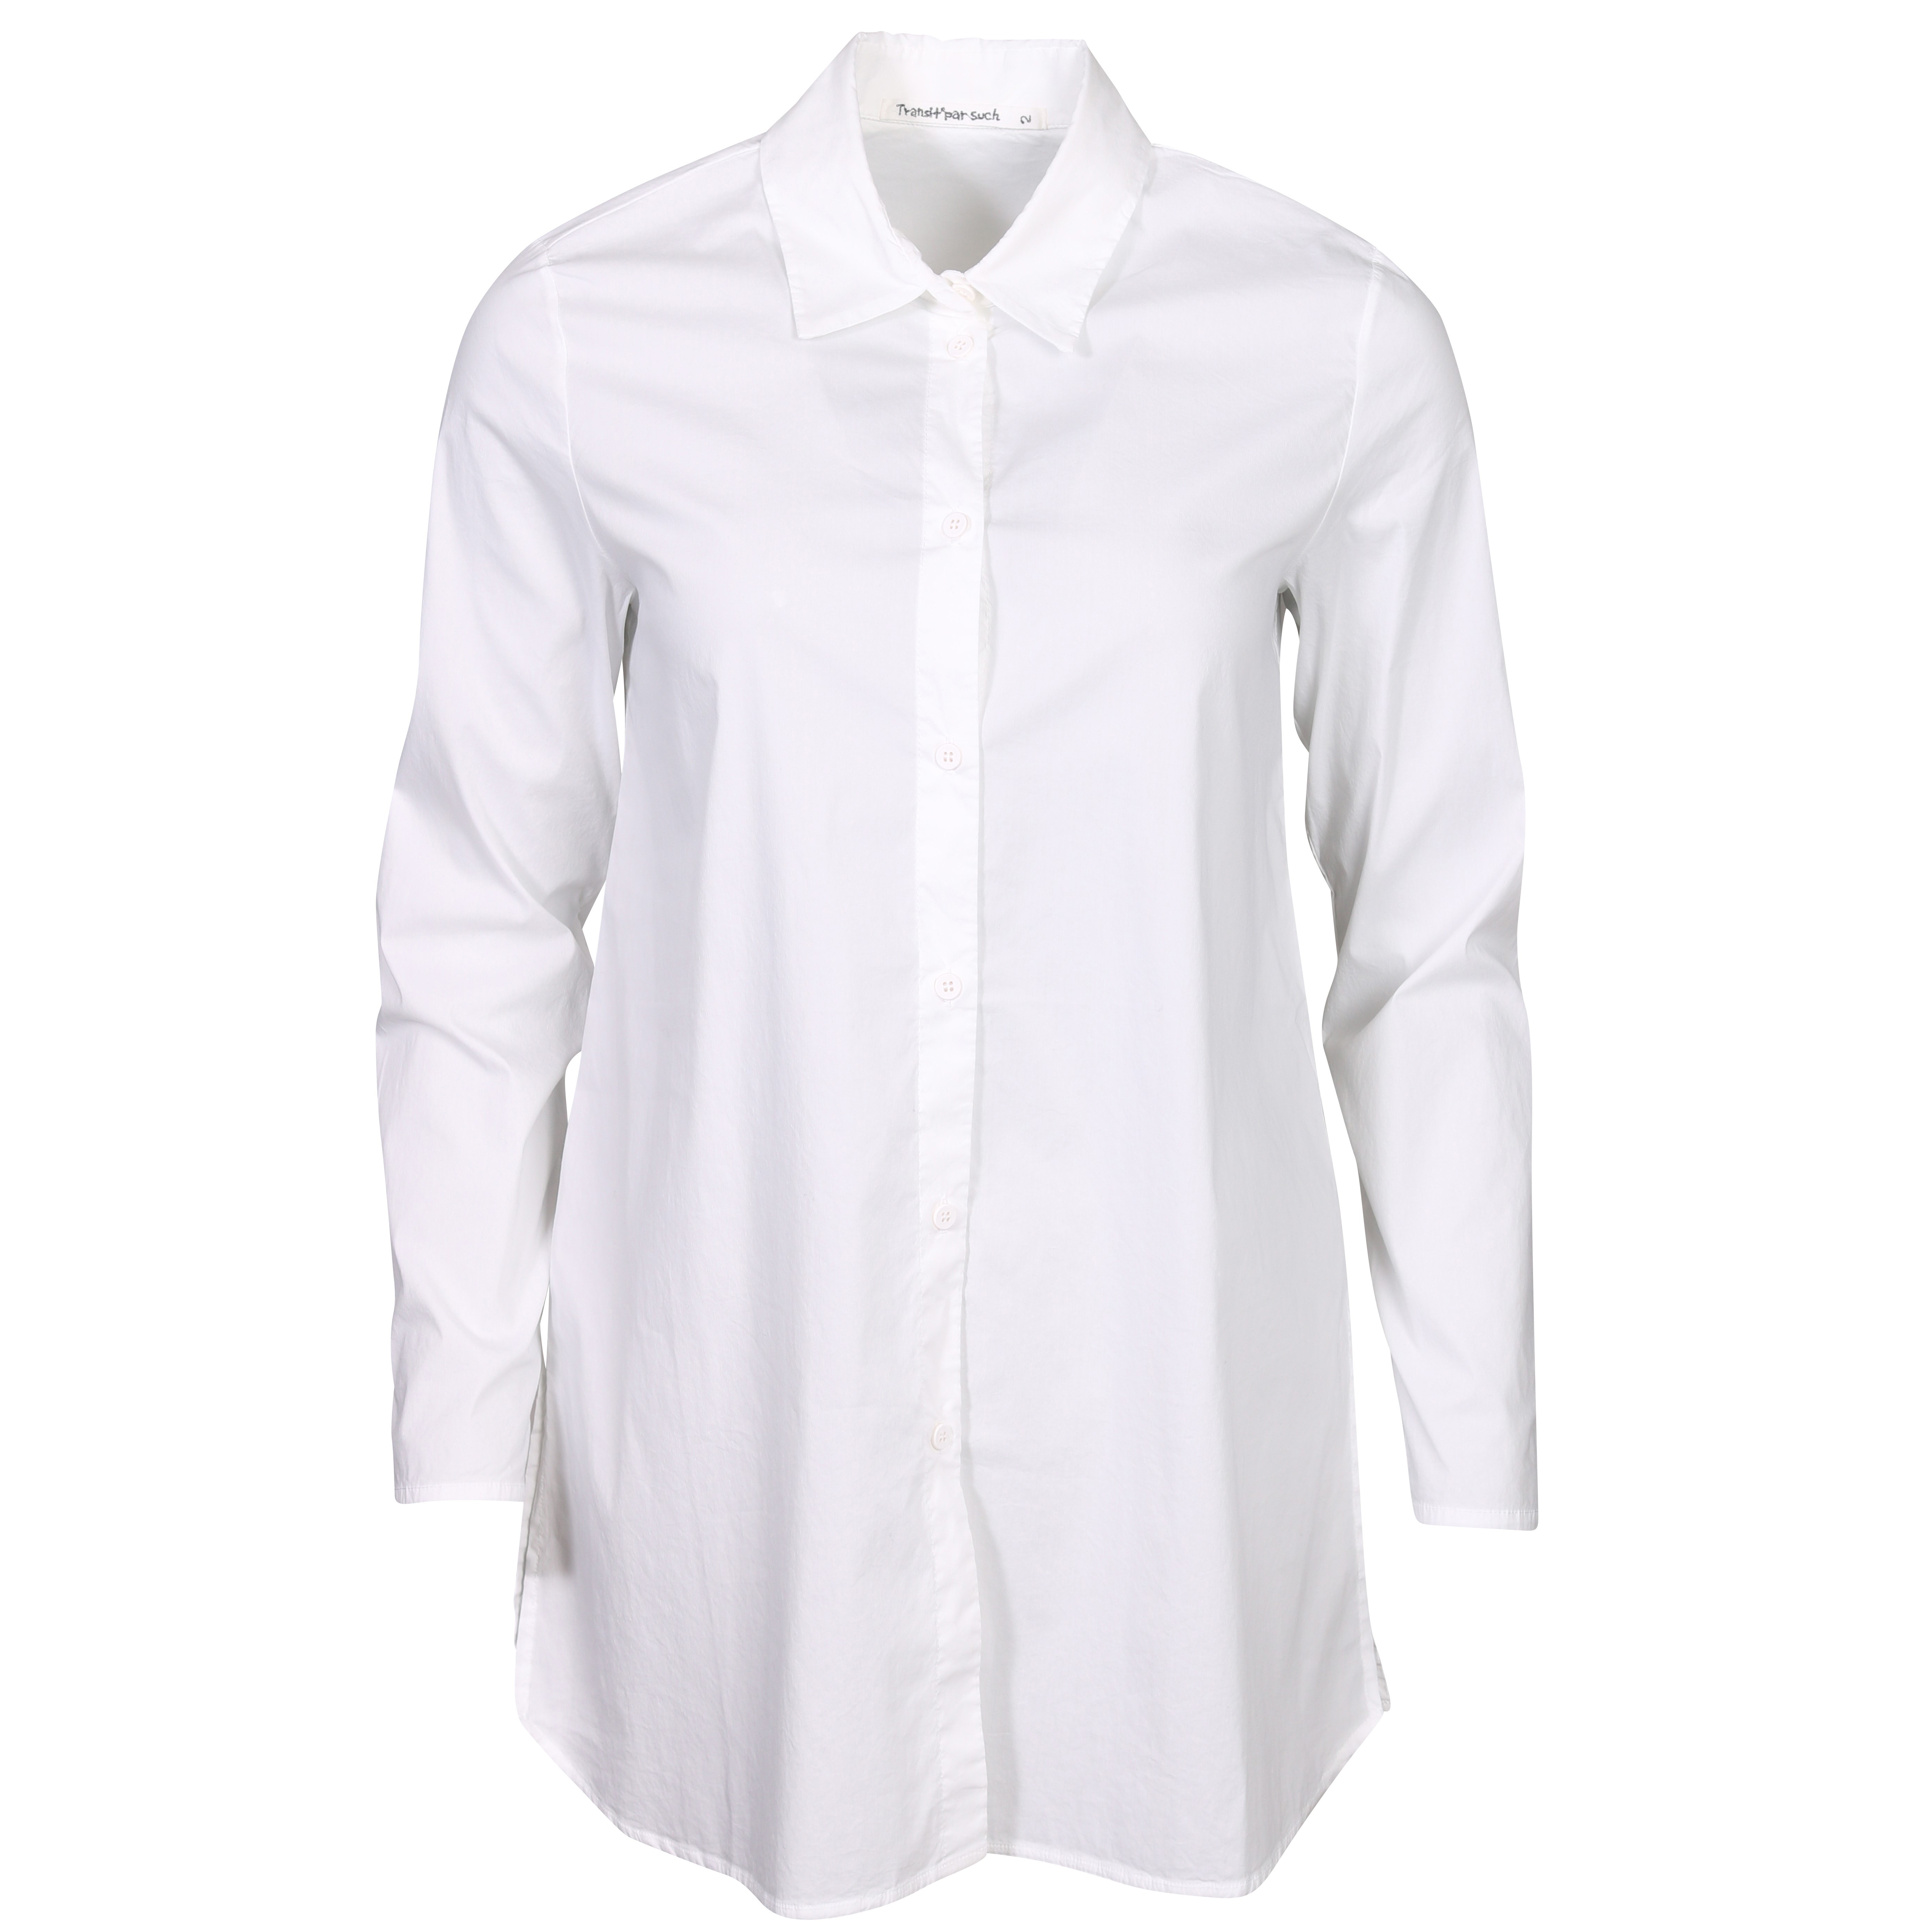 Transit Par Such Blouse in White